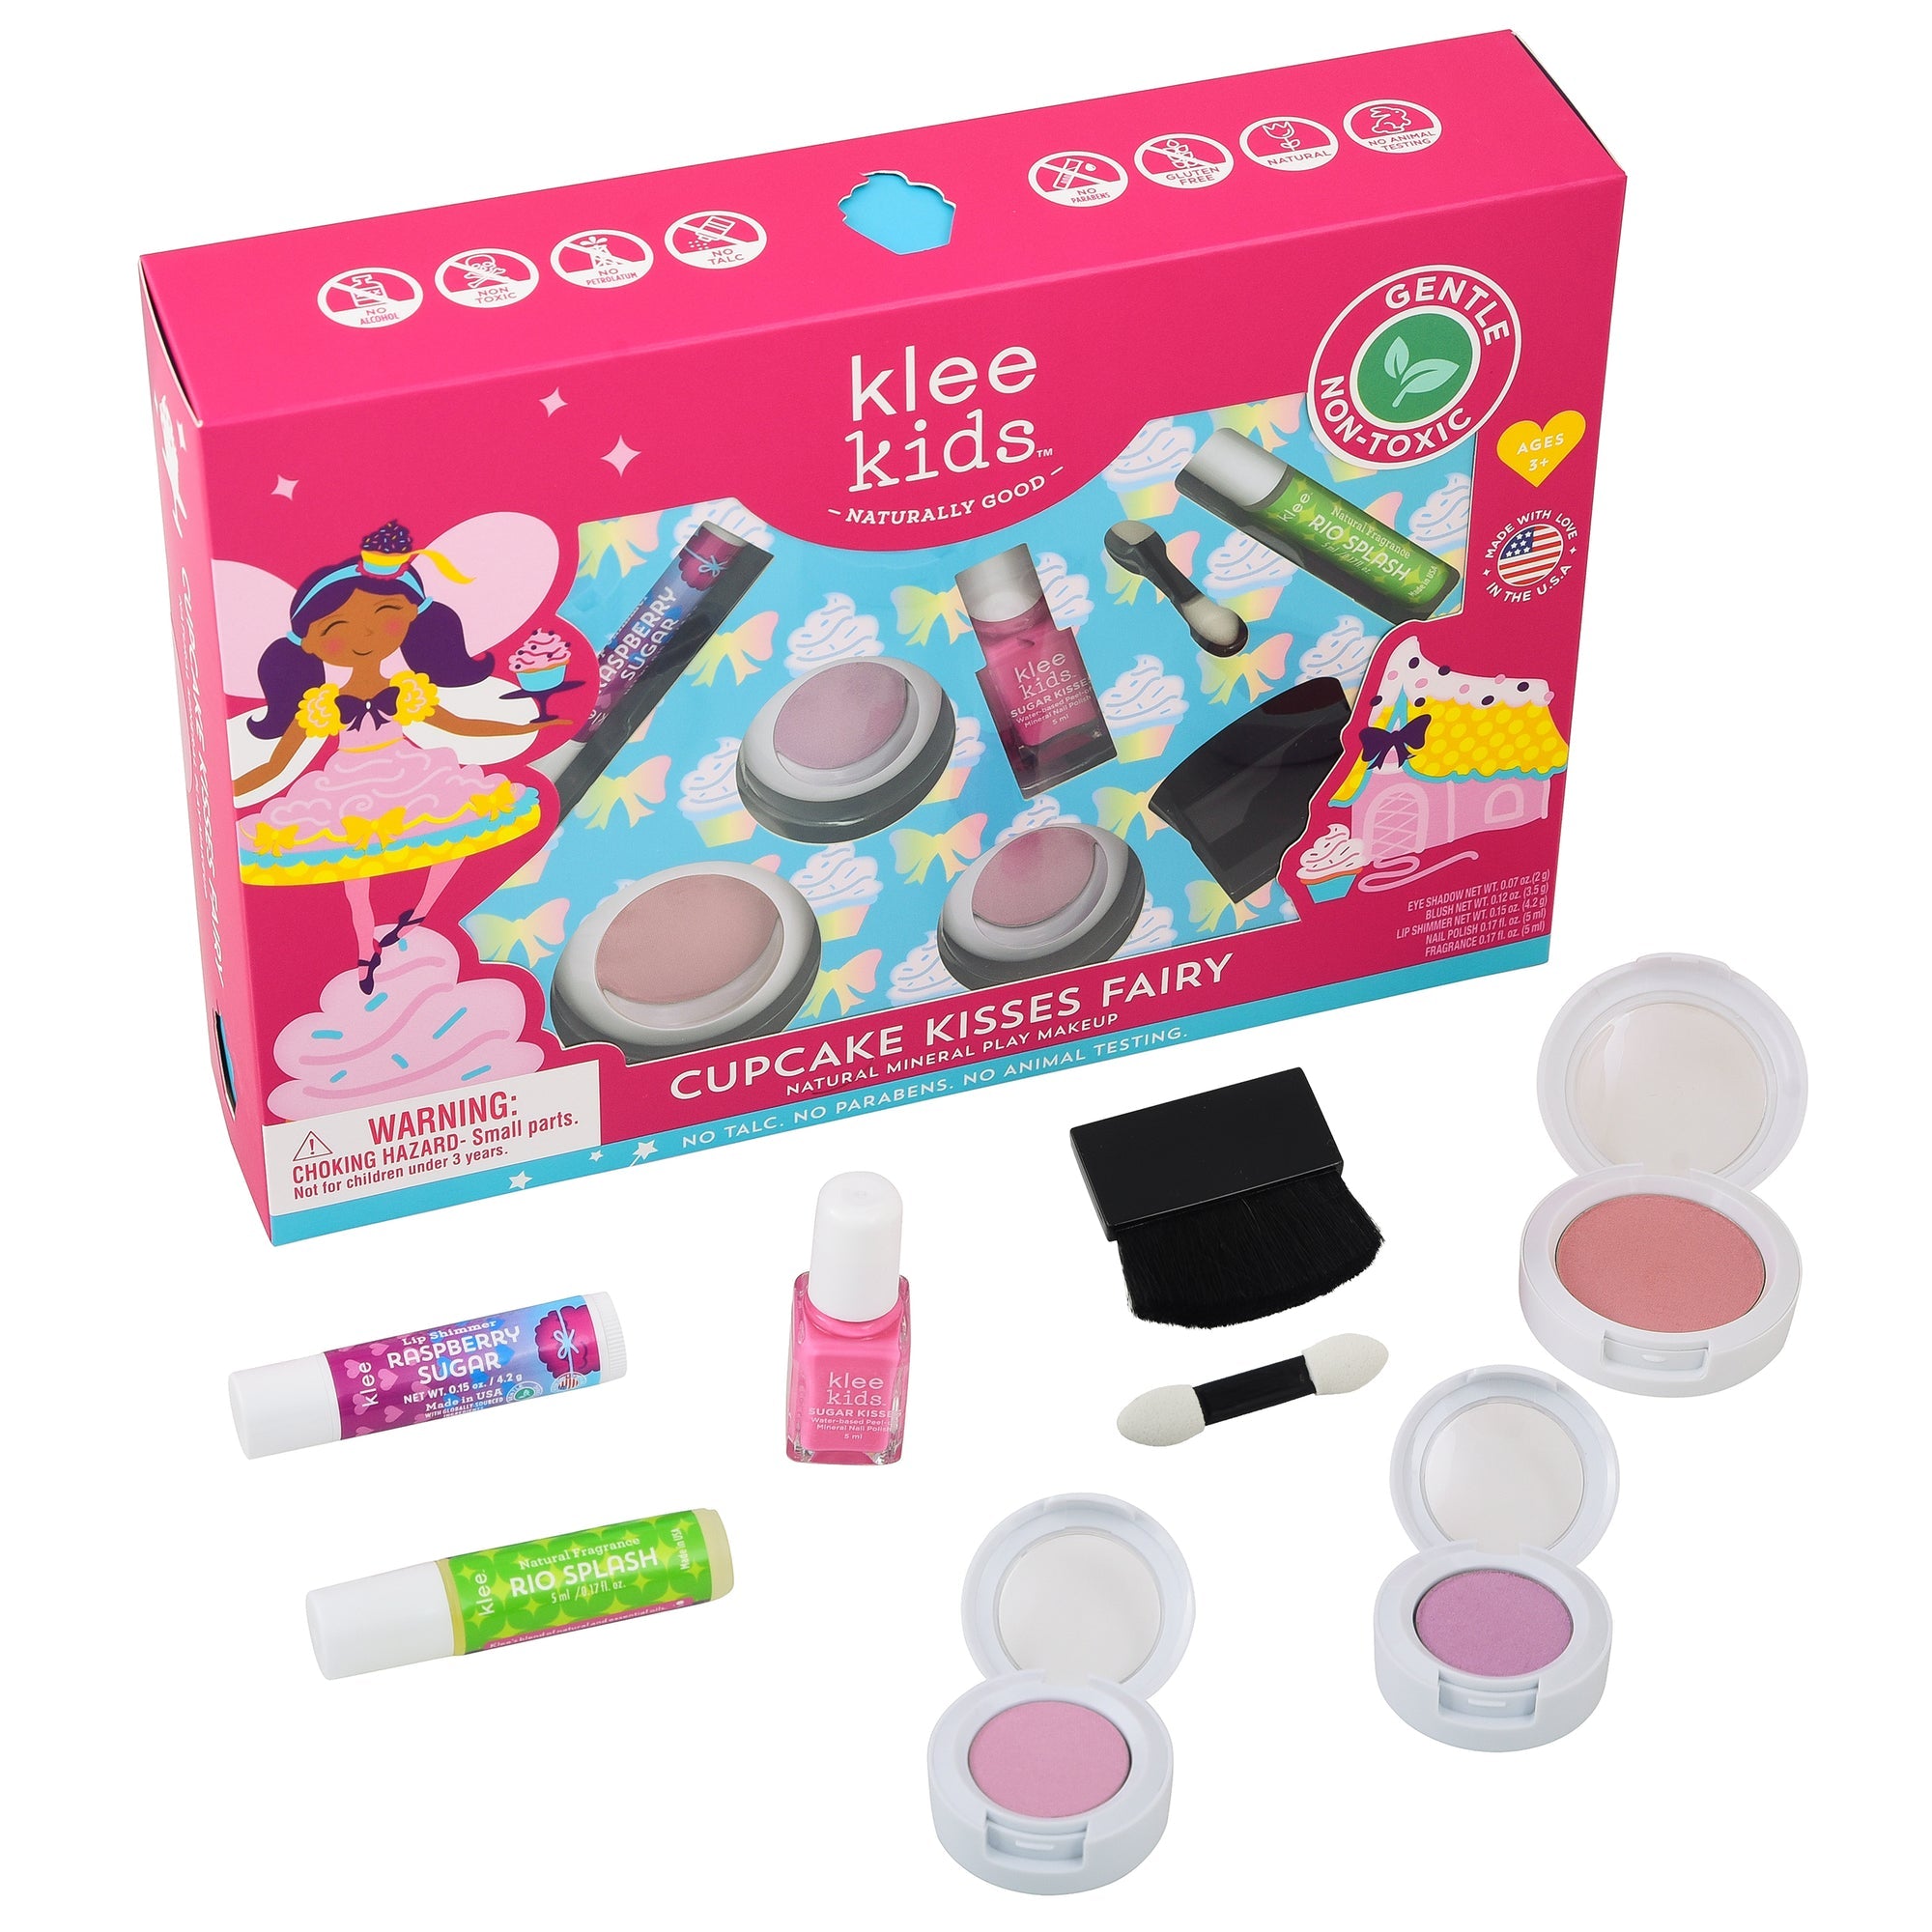 Cupcake Kisses Fairy 6pc Deluxe Natural Play Makeup Set